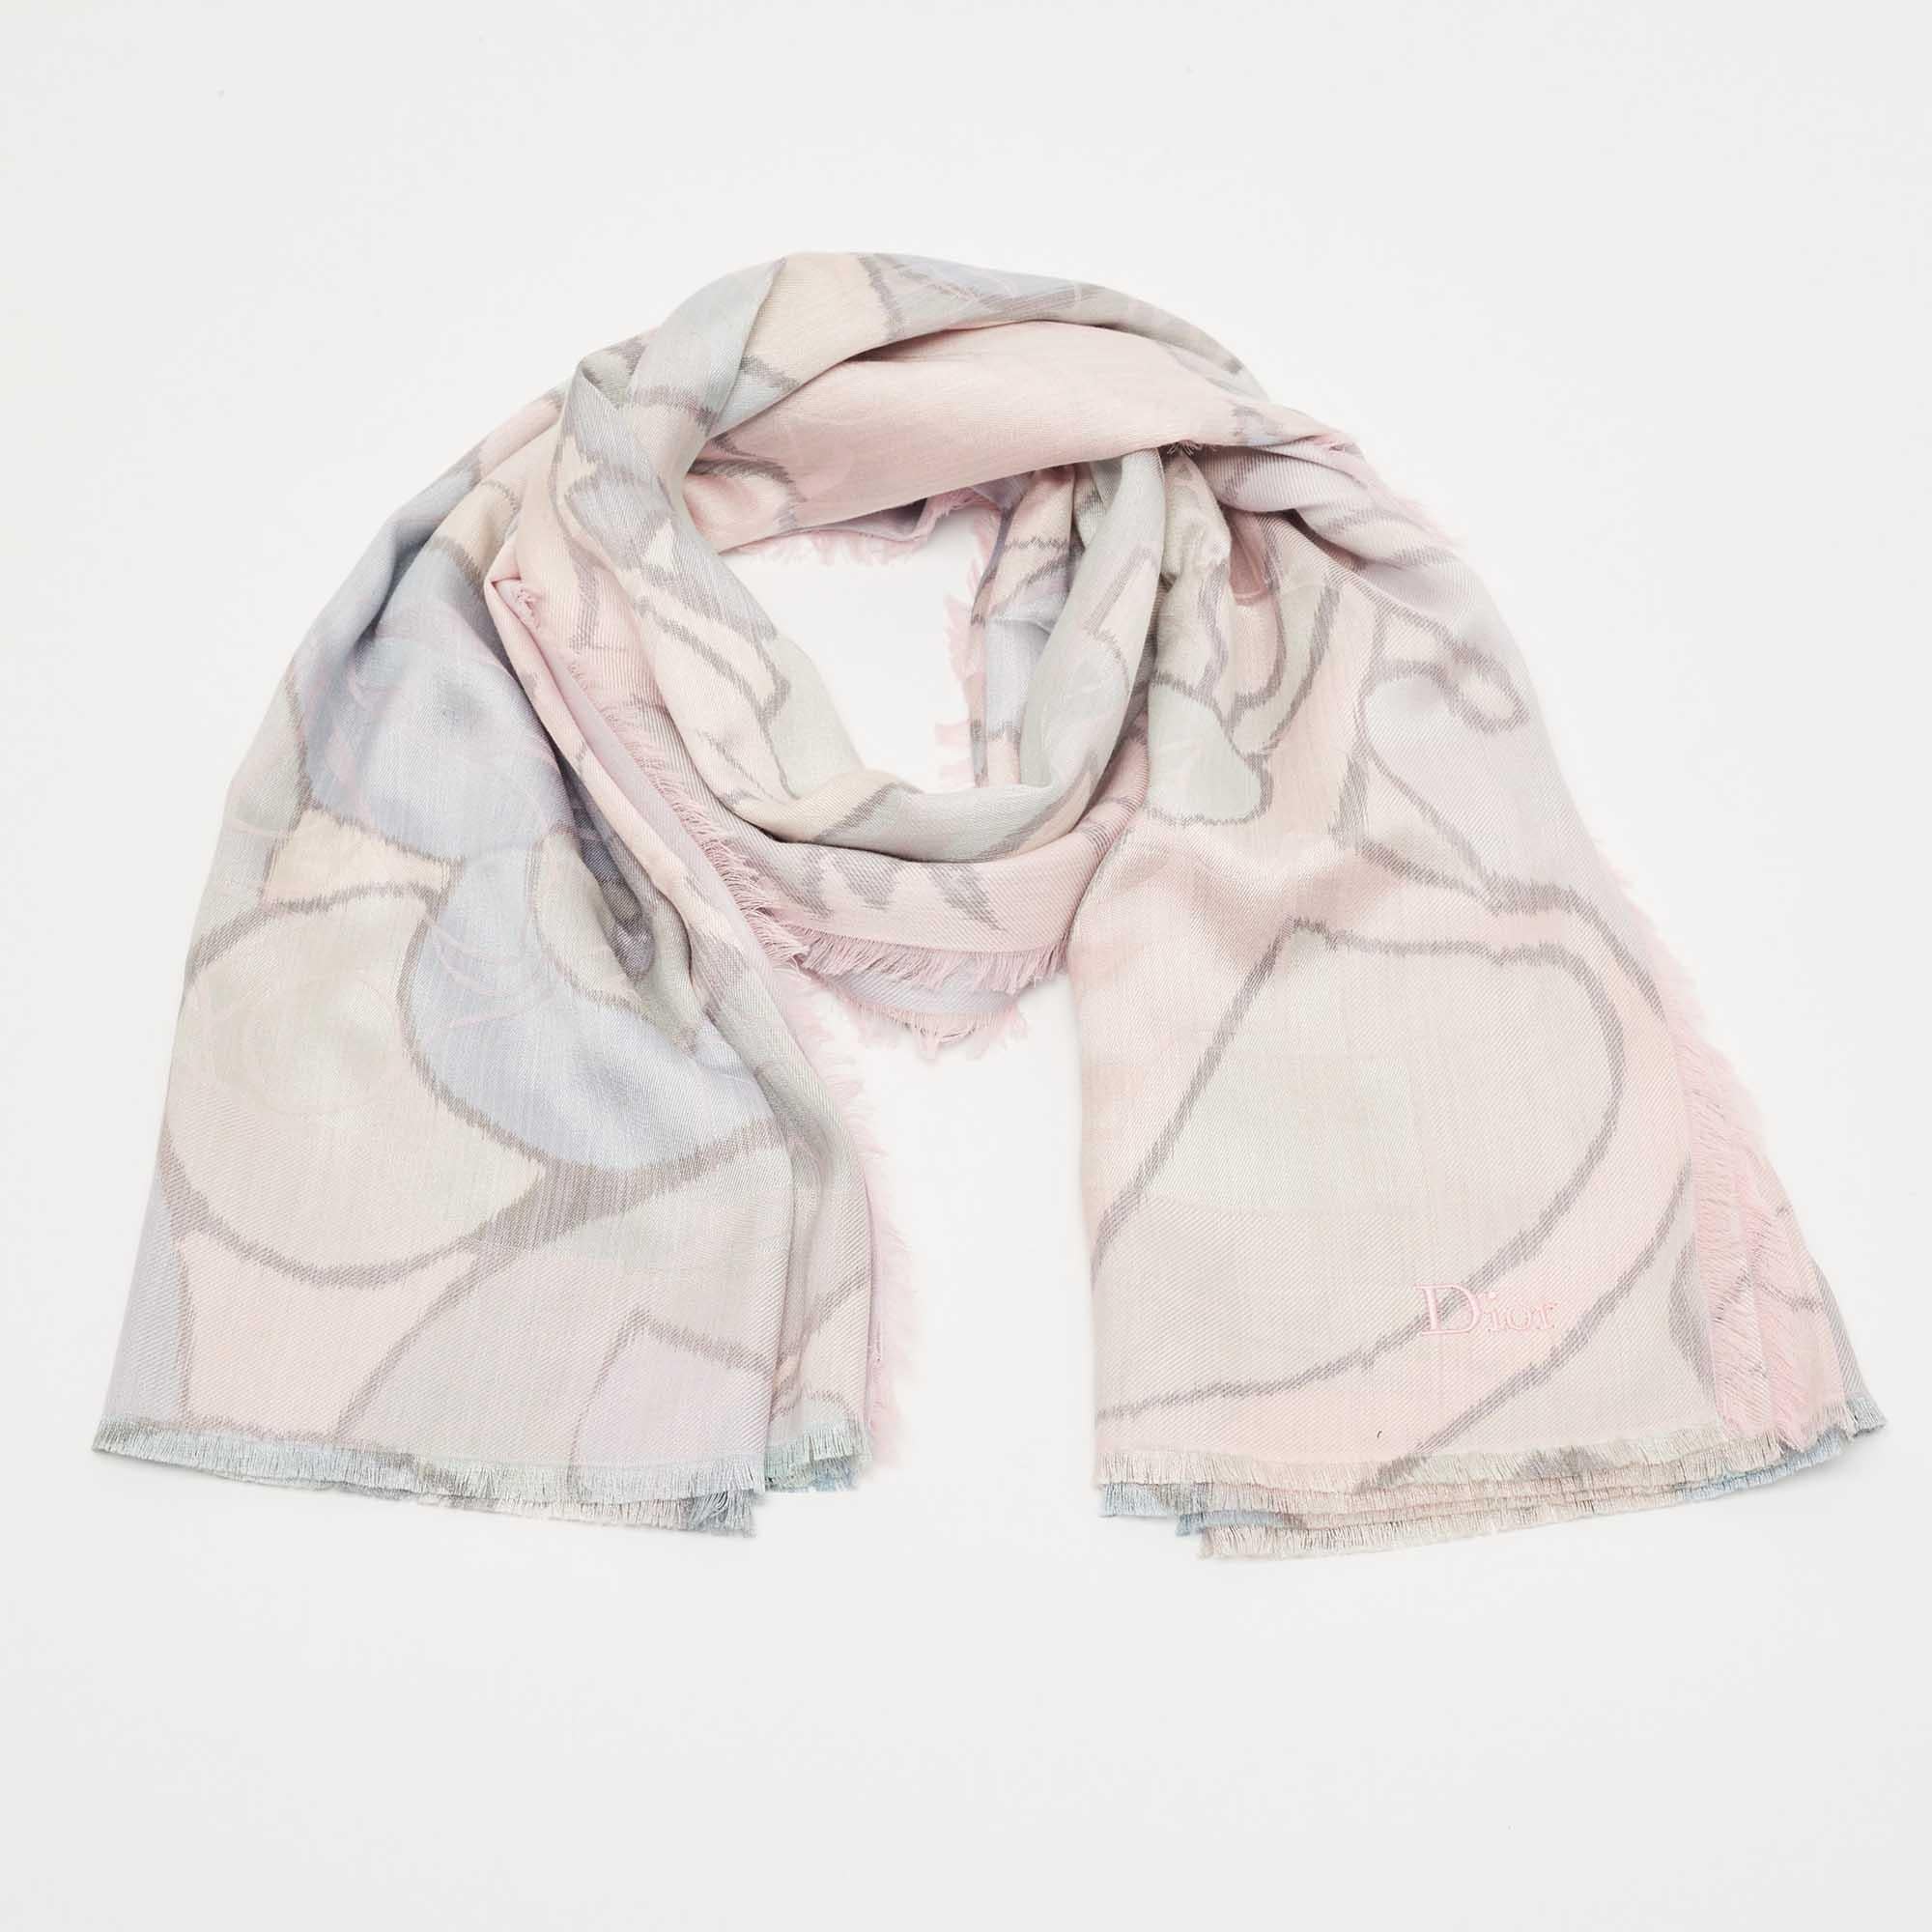 Classy and stylish are some words that come to our minds when we look at the scarf. The label brings you this versatile creation made from luxurious materials that you style with many outfits.

